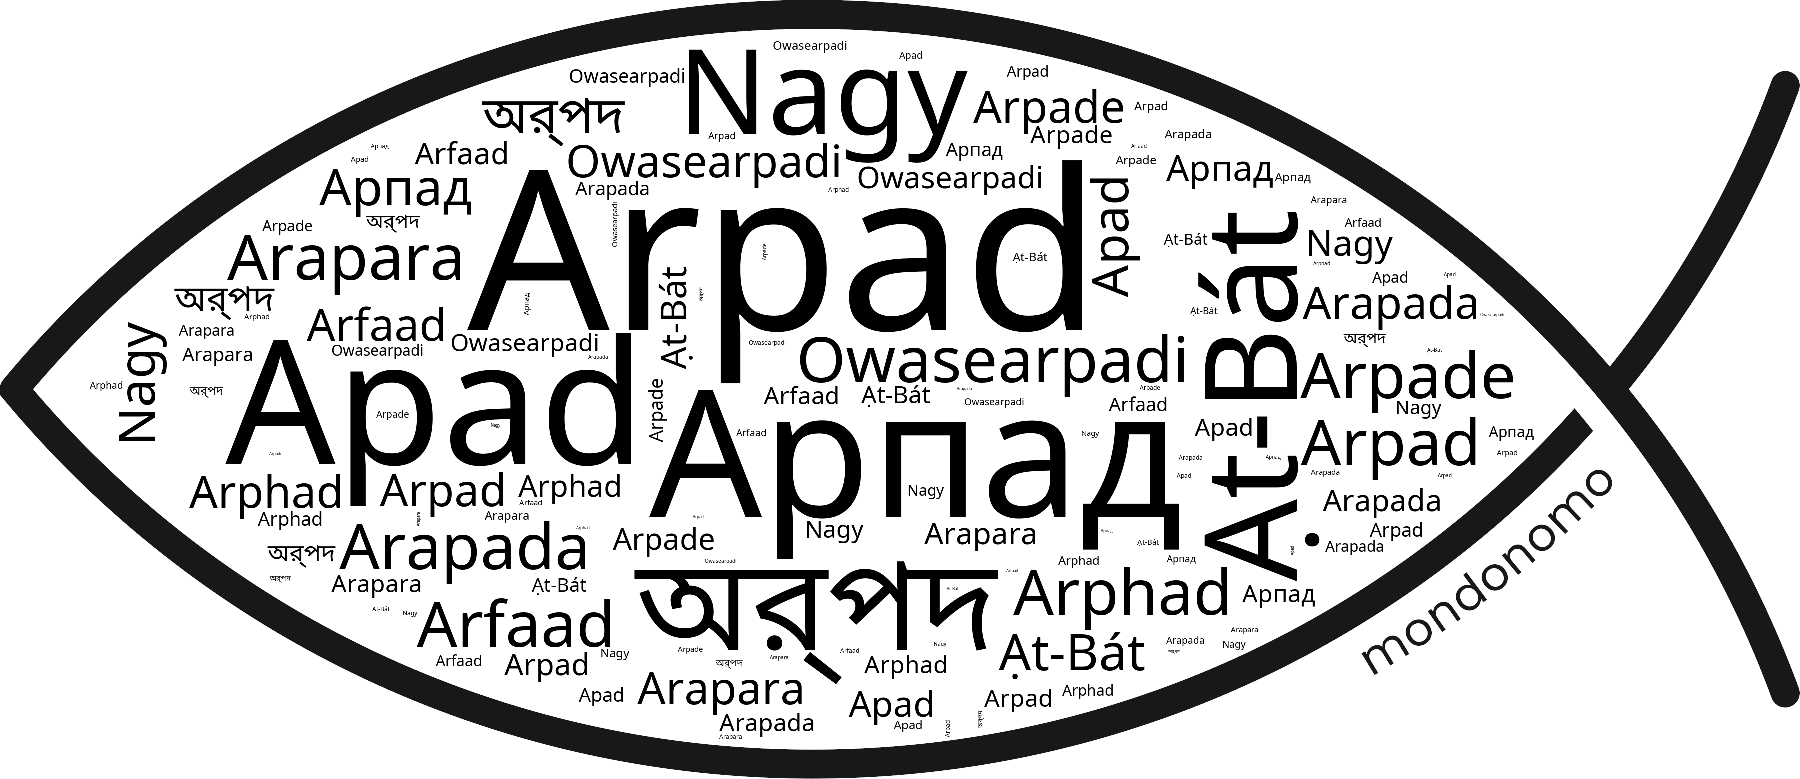 Name Arpad in the world's Bibles